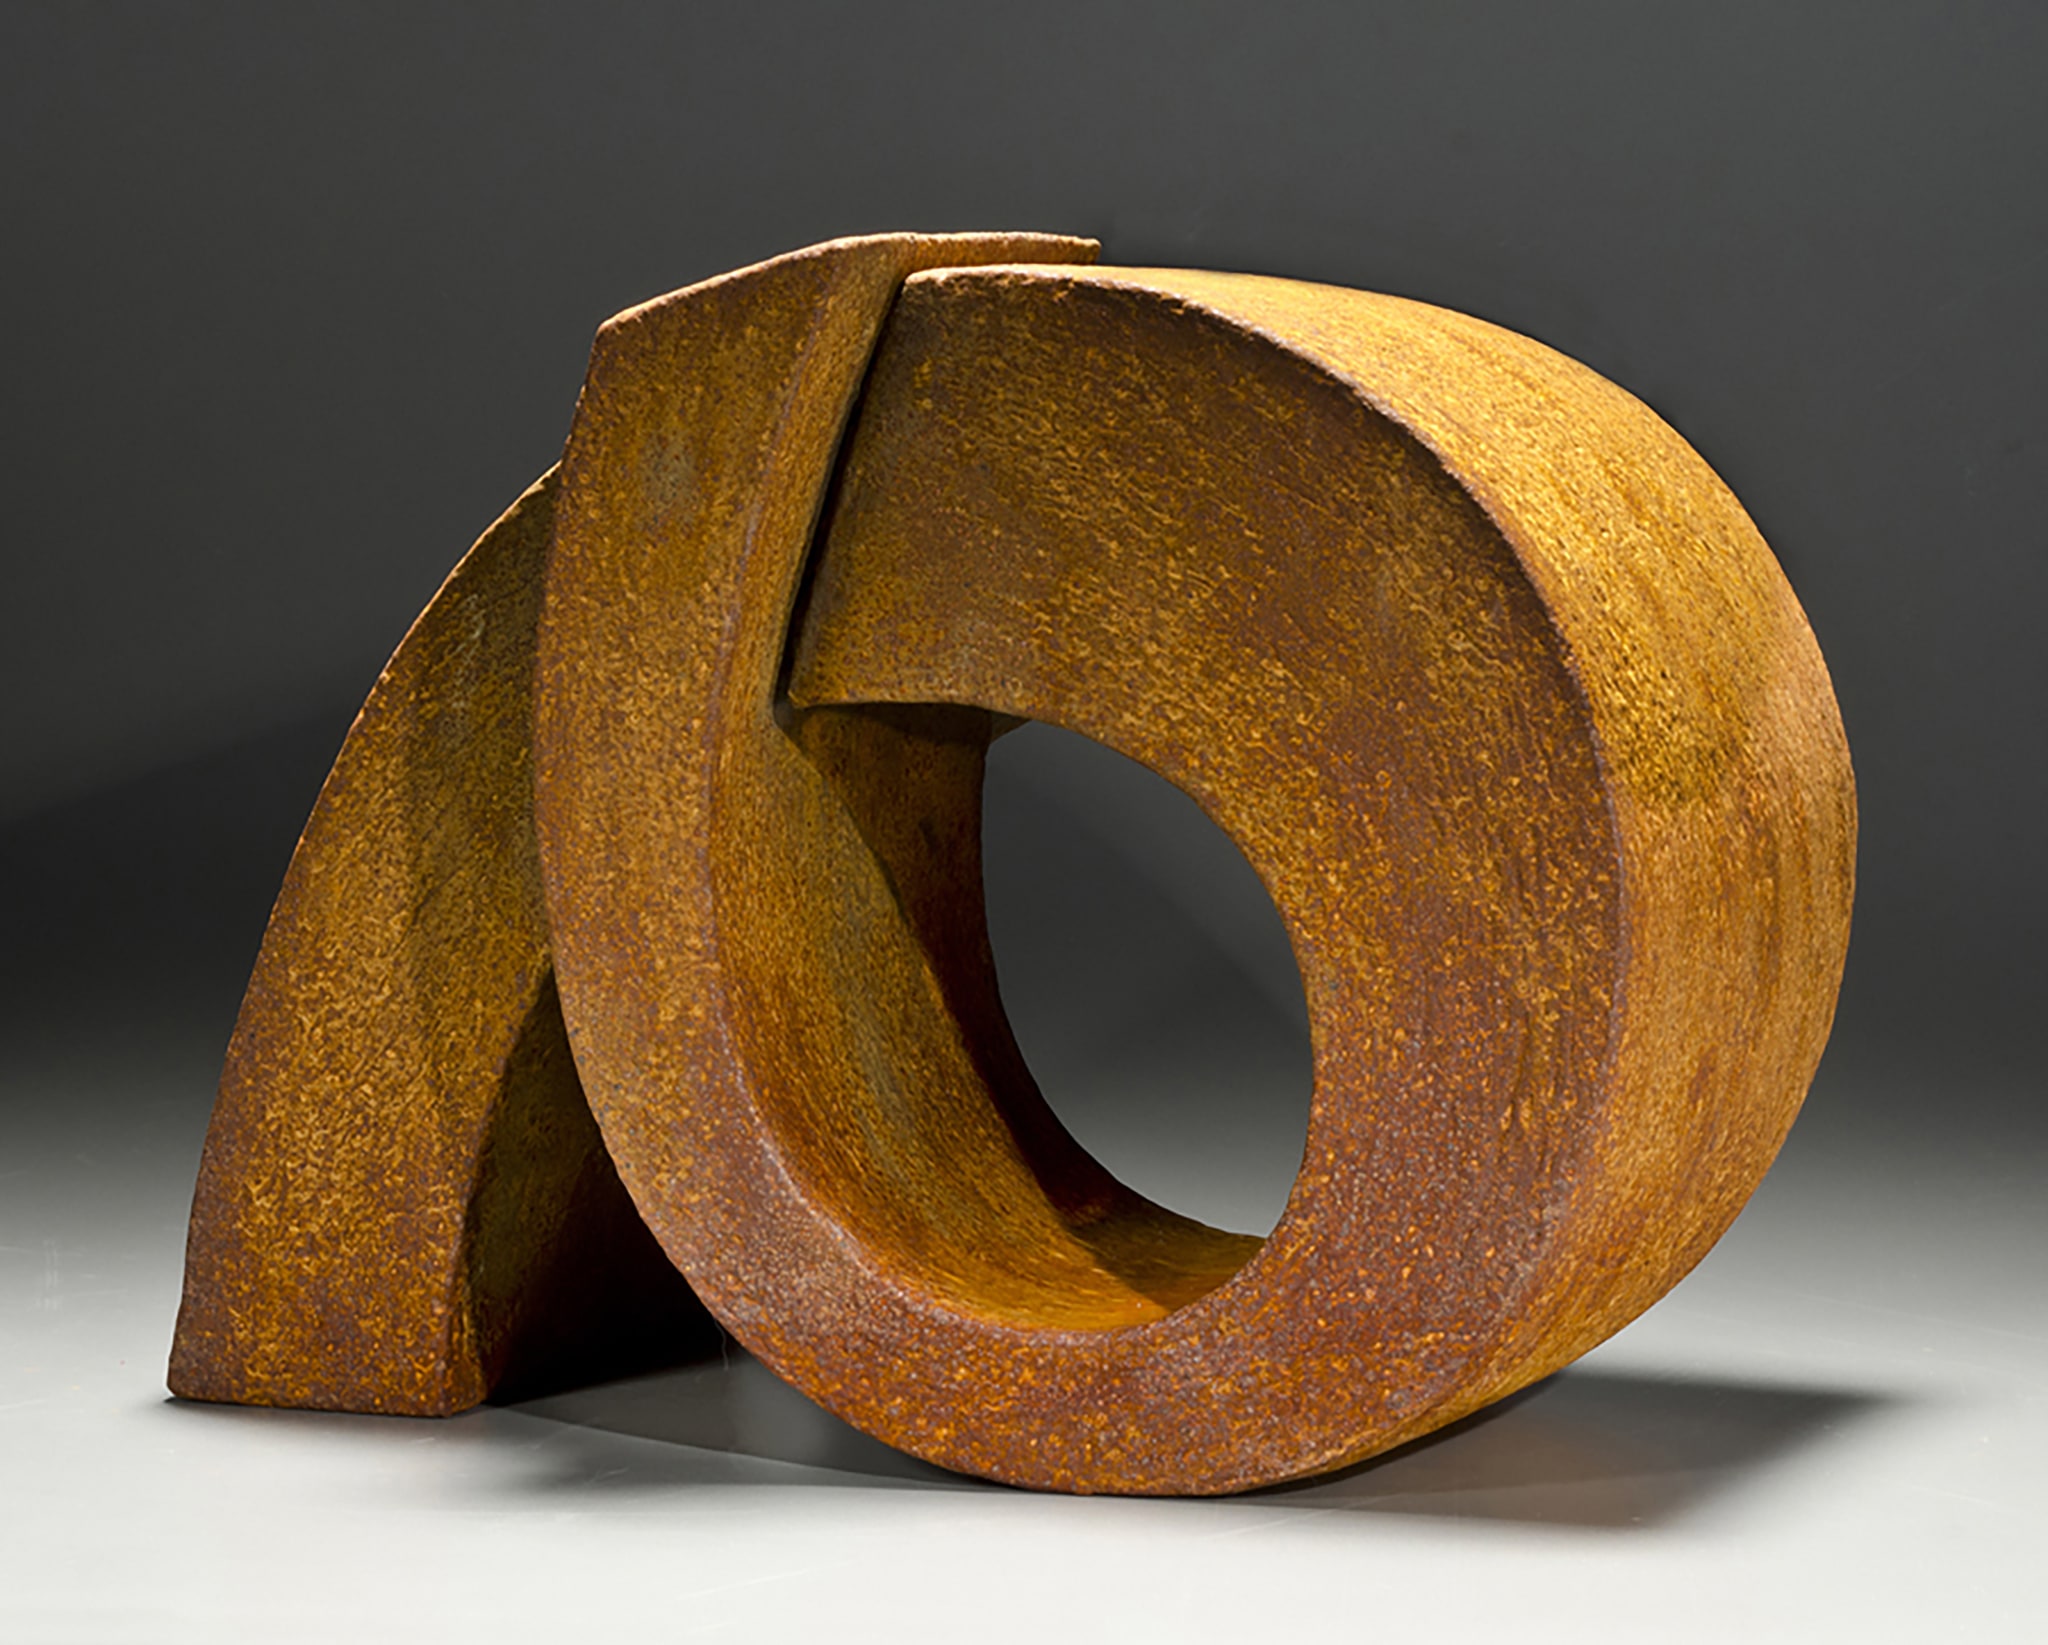 Intersection, 8.5" x 11" x 8.5", clay with iron oxide finish